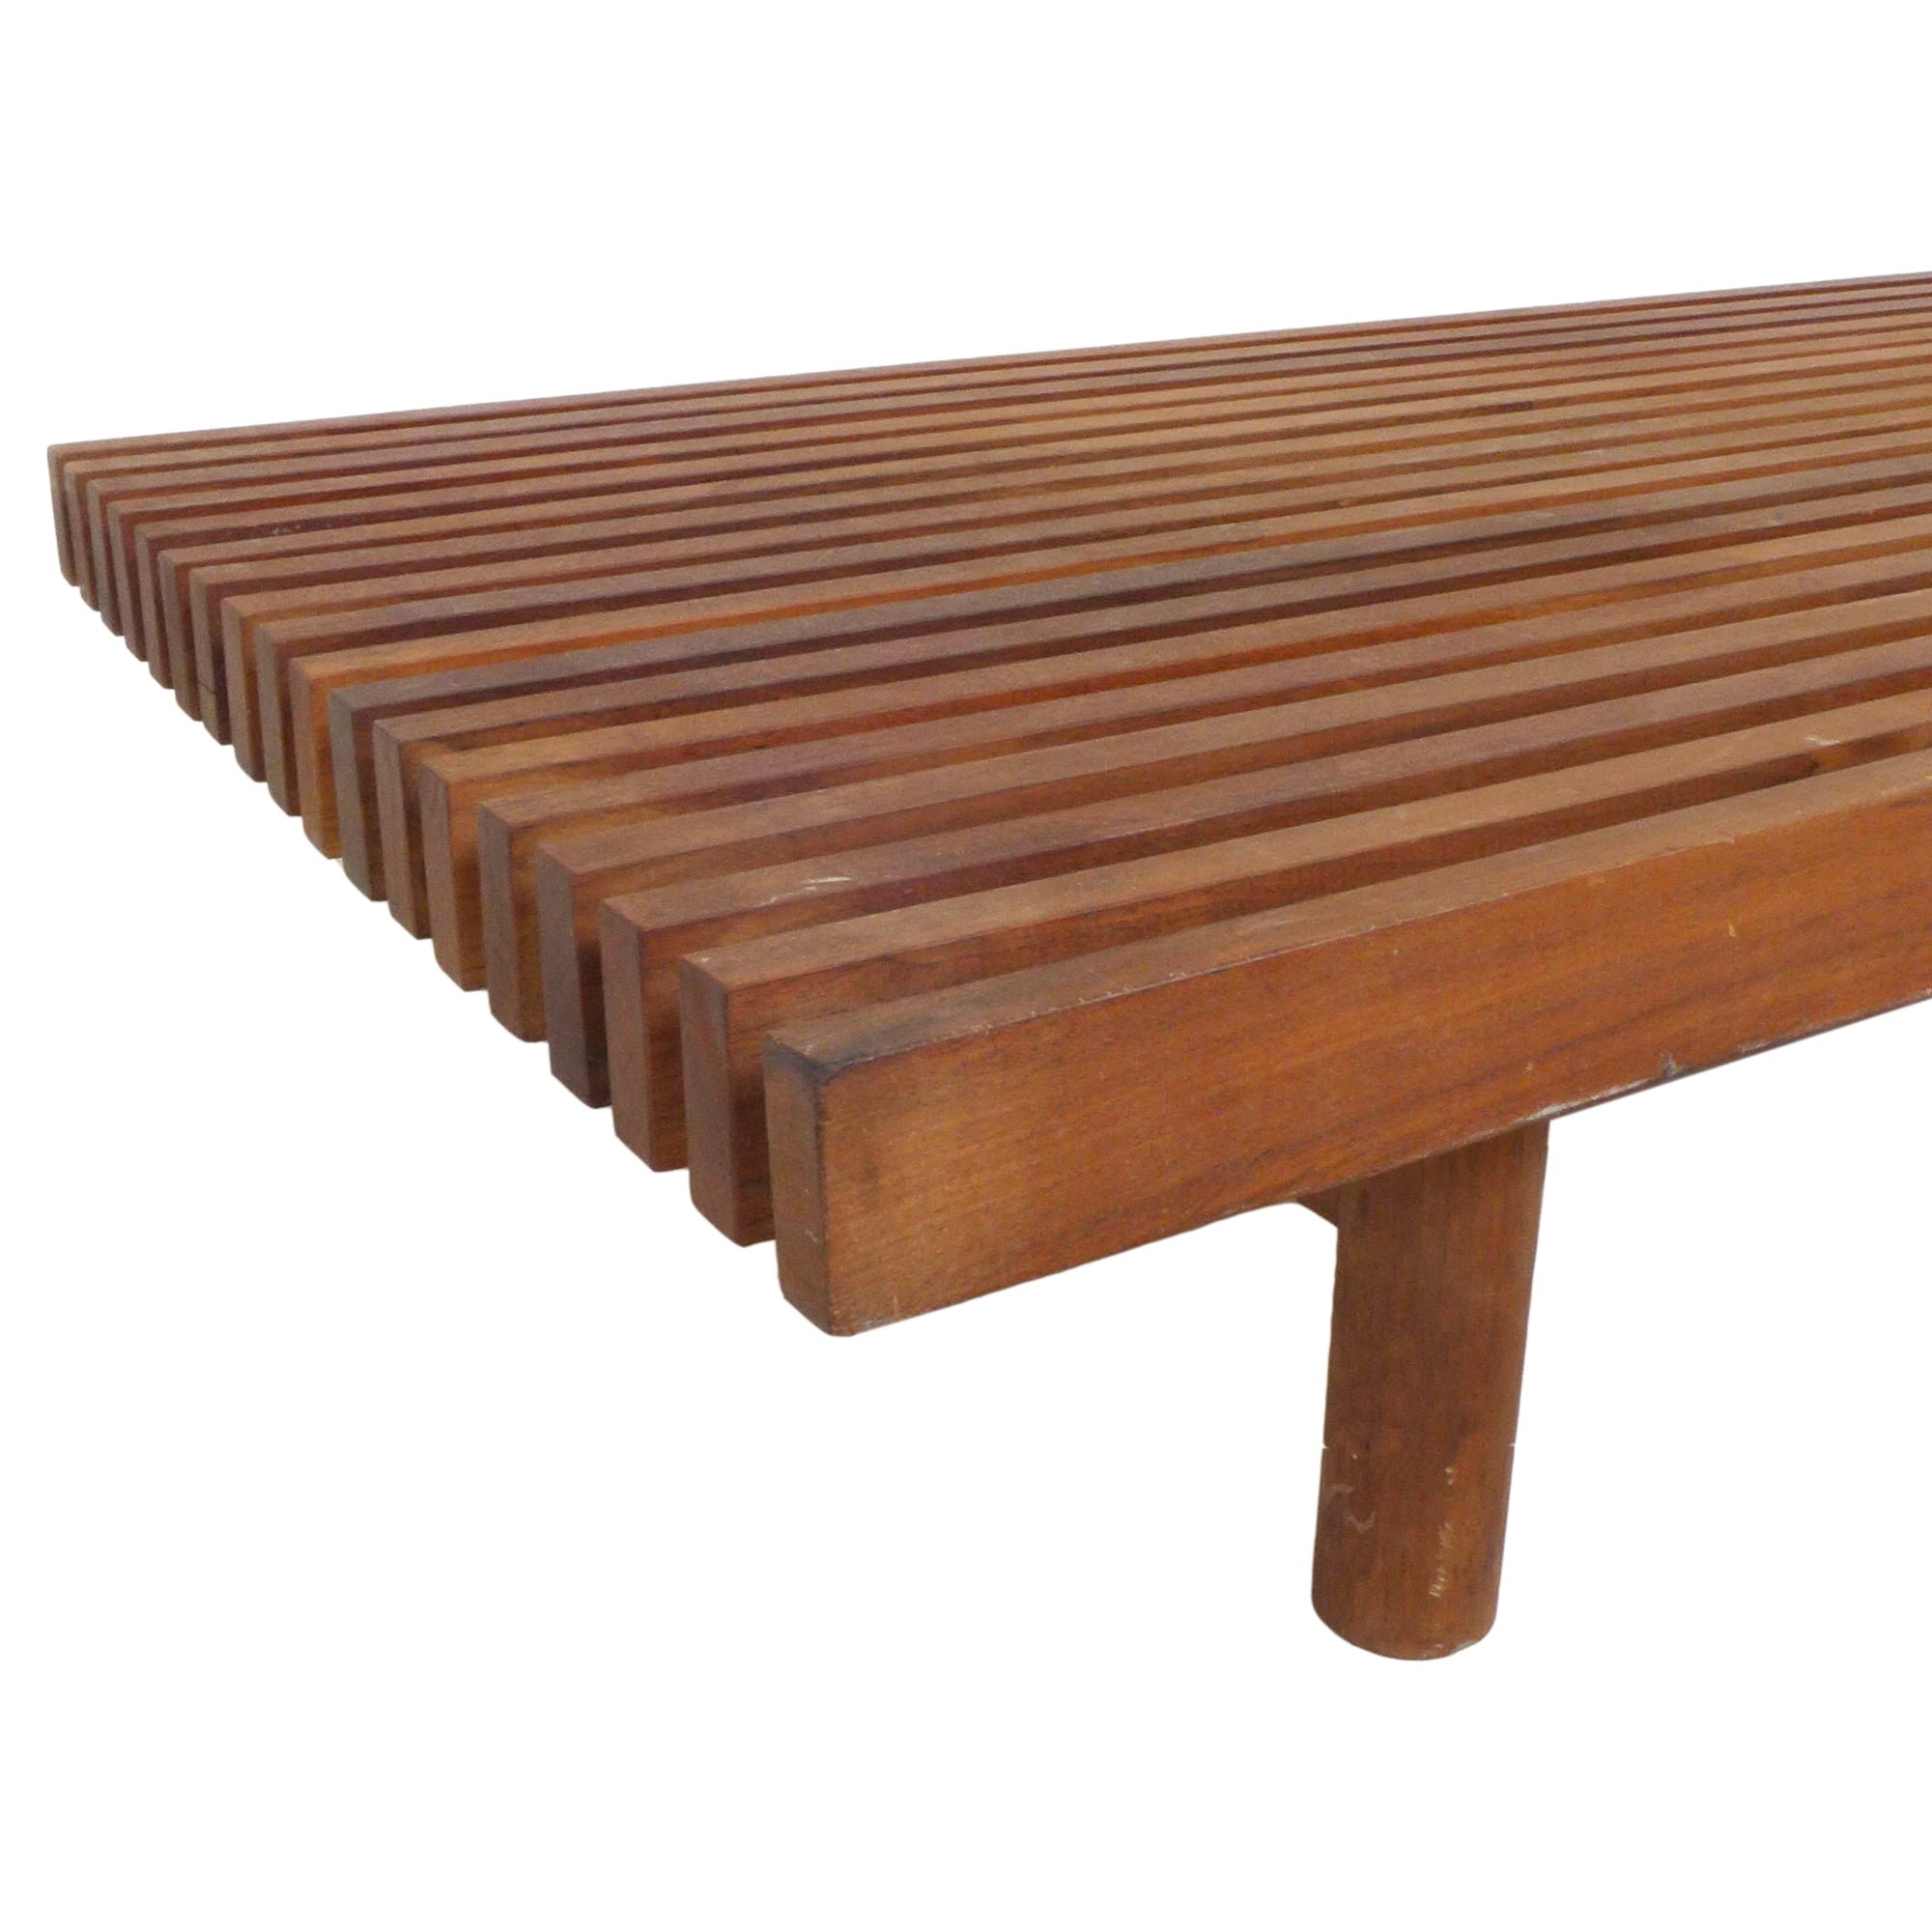 Low Slatted Bench in Teak by William Krisel, AIA